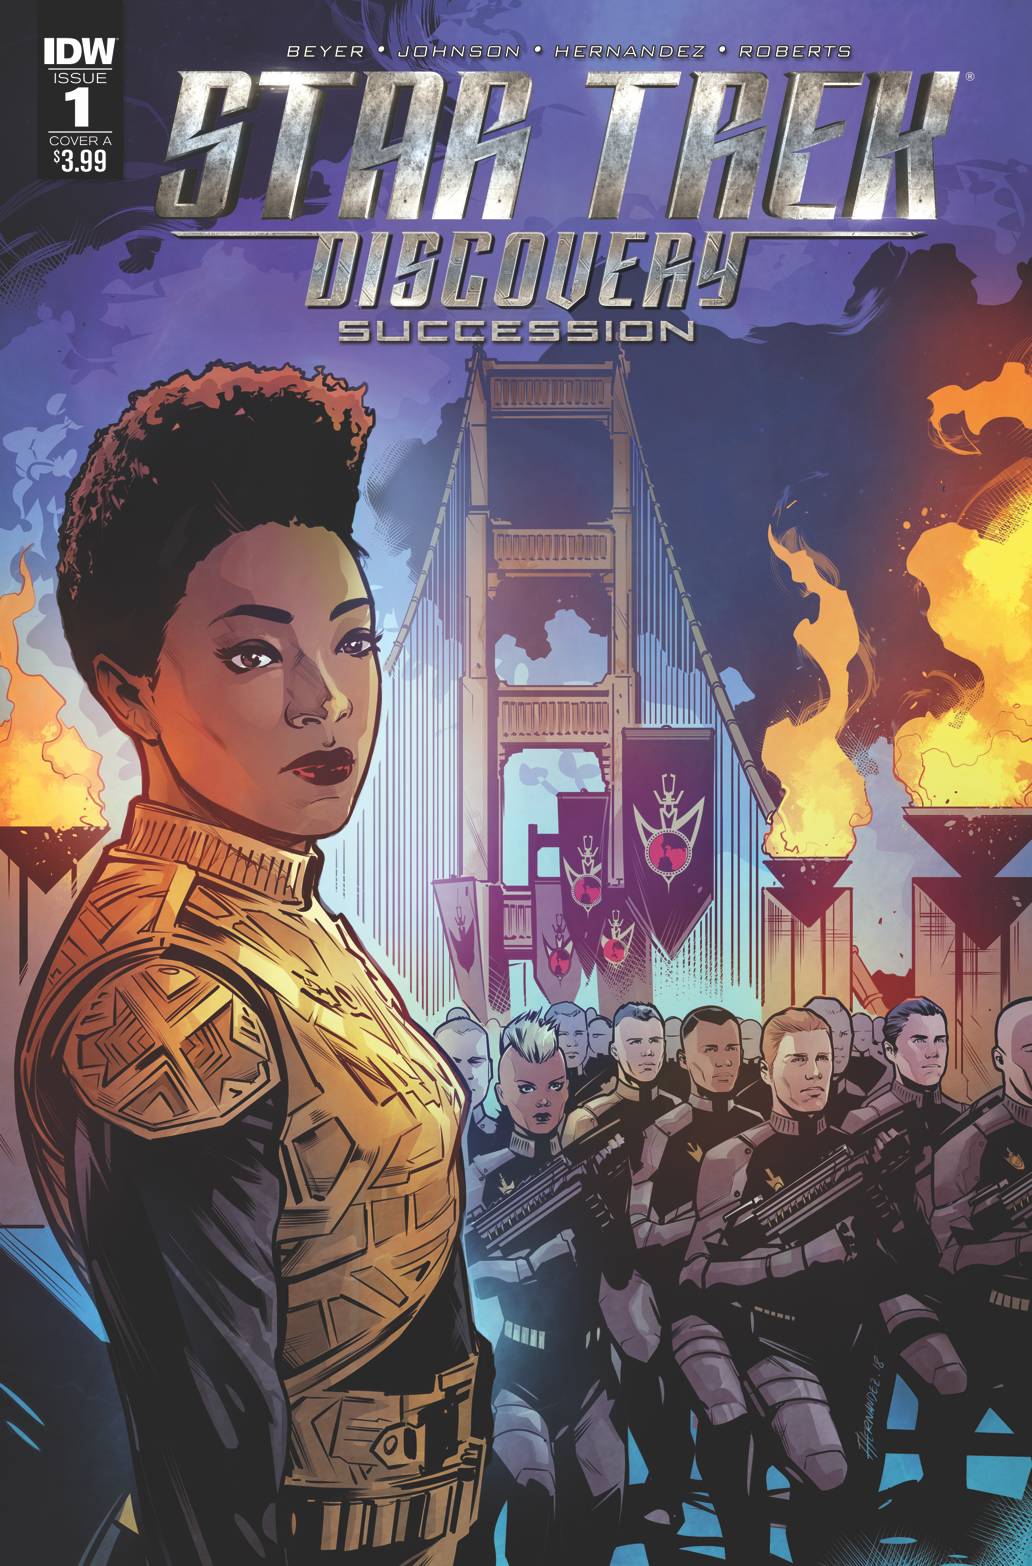 Star Trek Discovery Succession #1 Cover A Hernandez